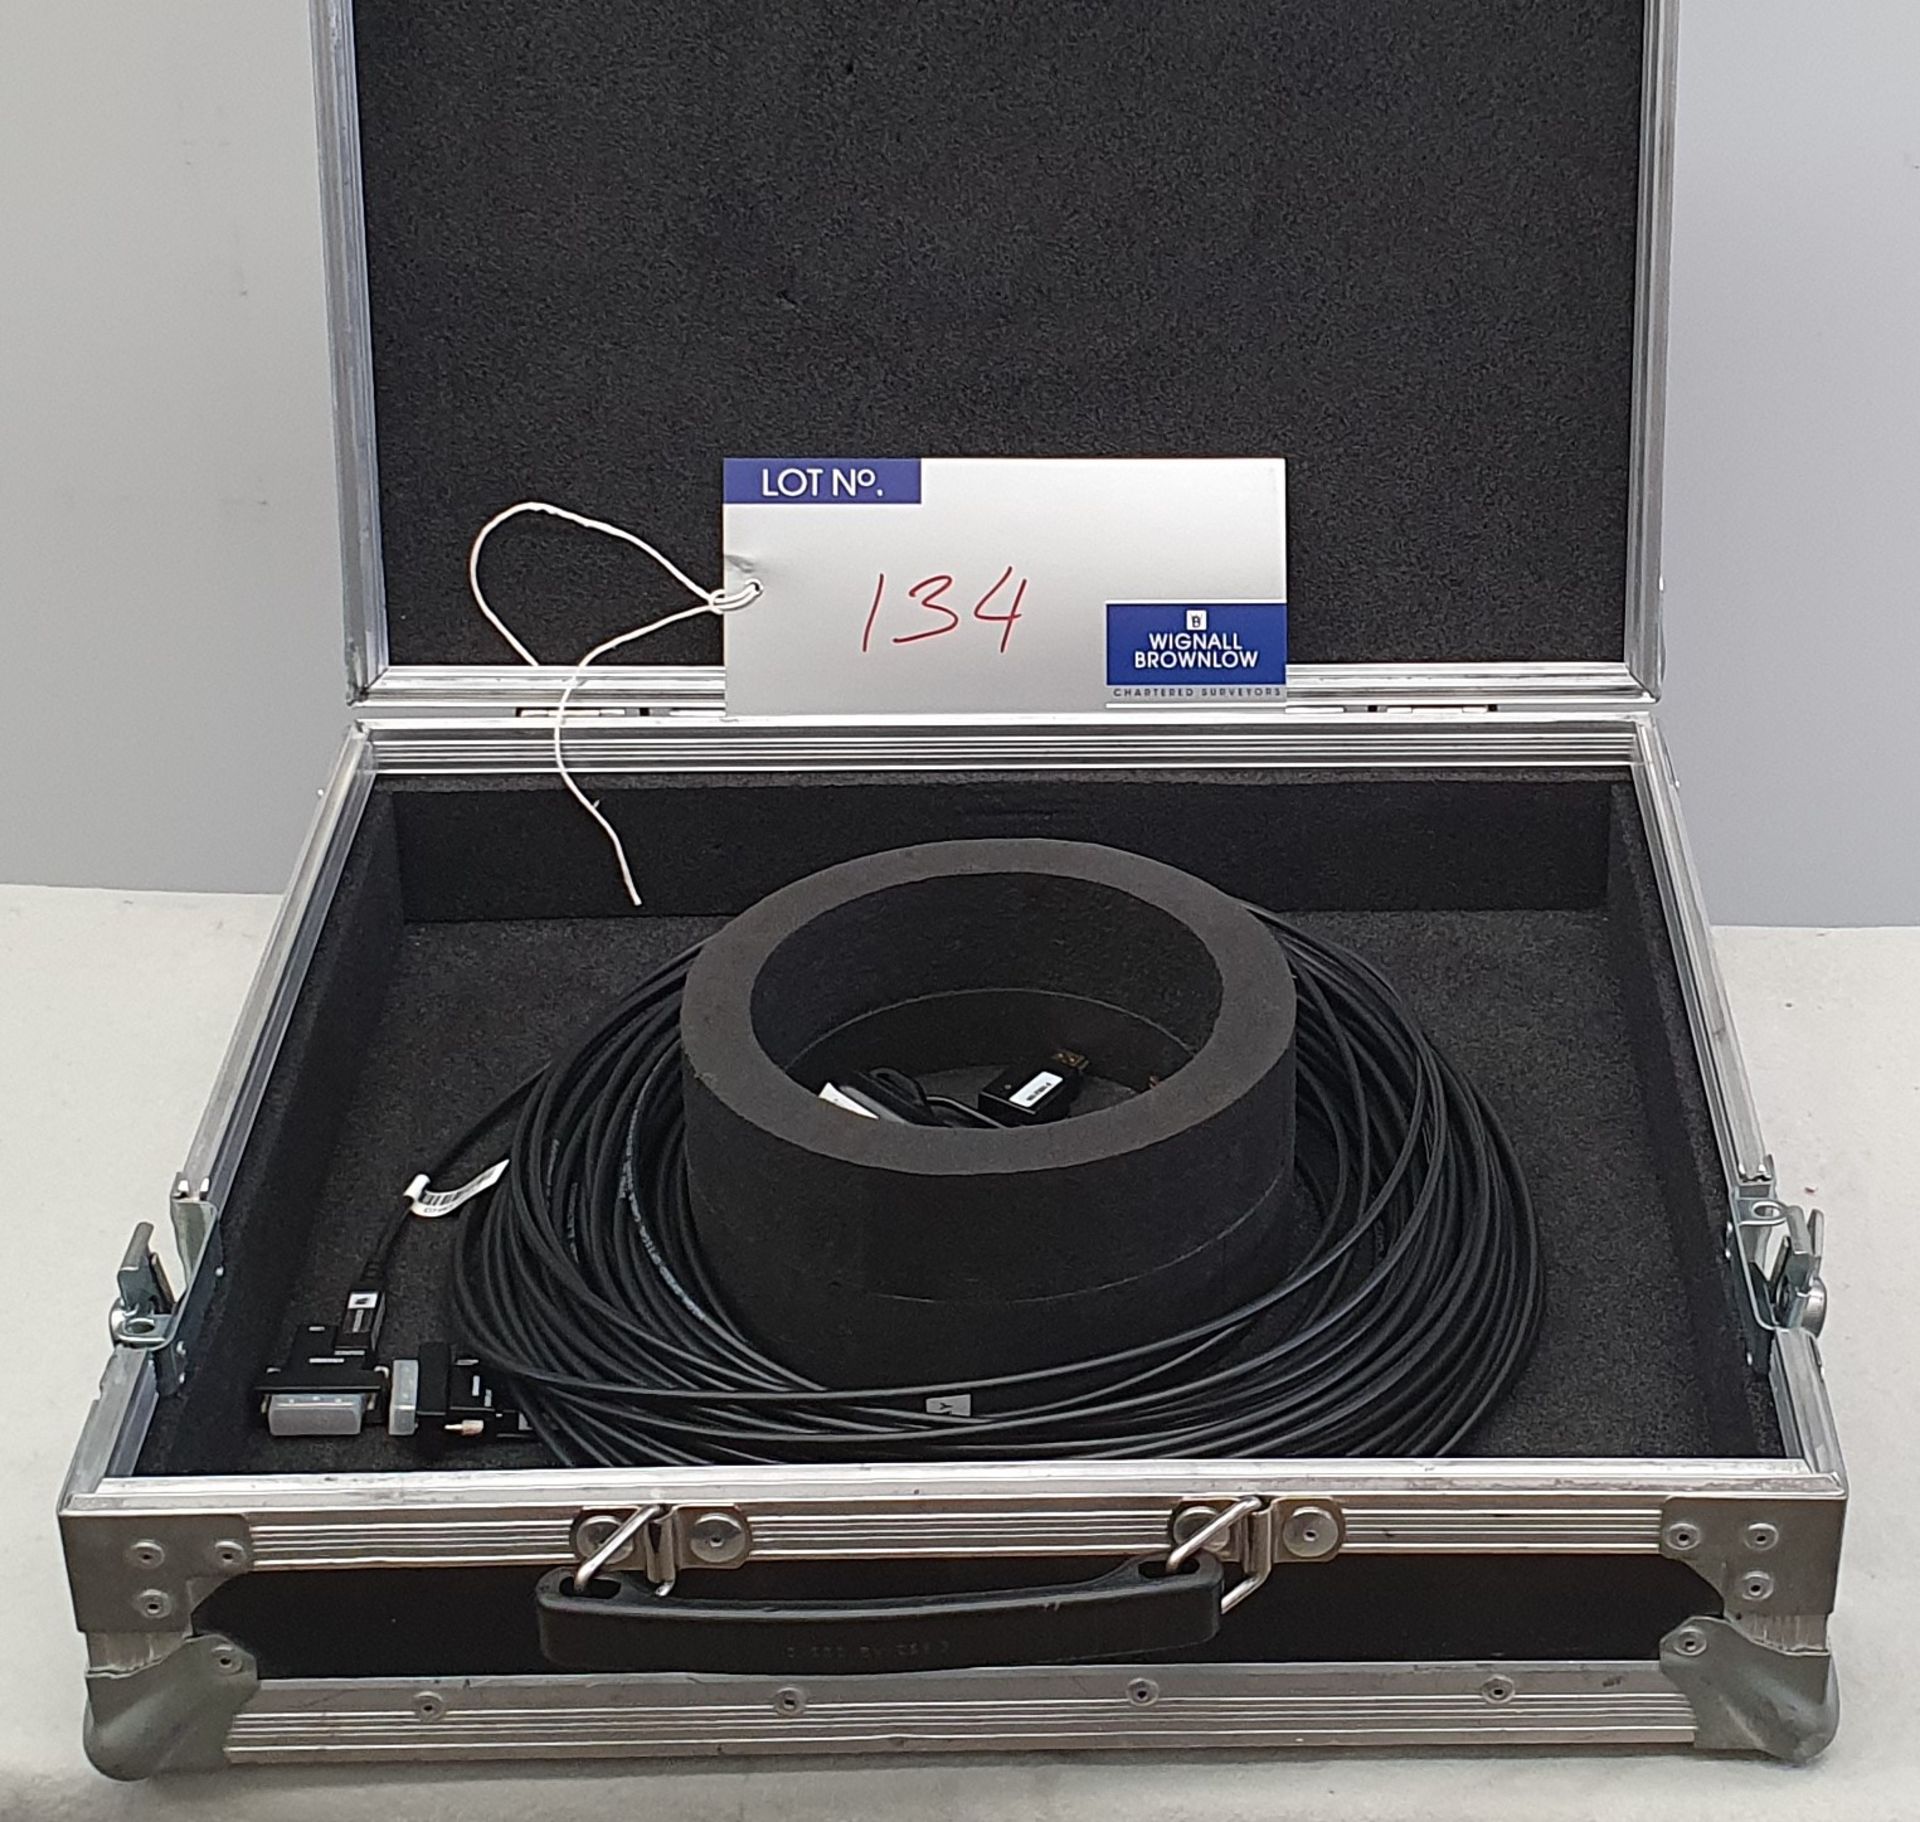 50m Kramer DVI Fibre Cable with PSU and slim 5star flight case, 440mm x 490mm x 150mm. - Image 3 of 3